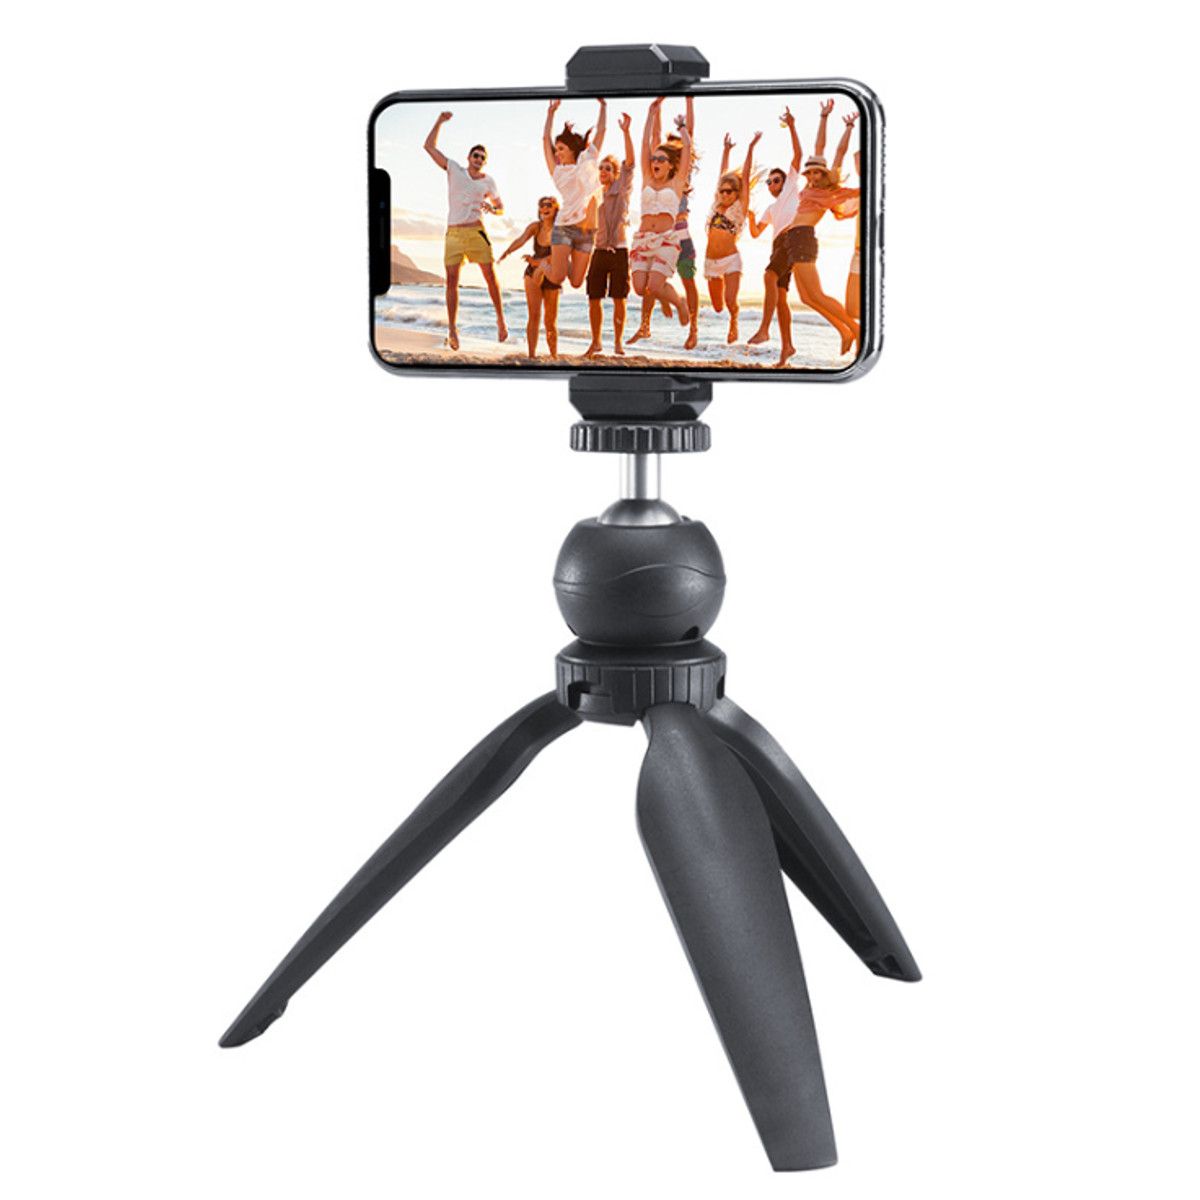 Tripod-Mobile-Phone-Stand-Holder-for-Camera-Phone-Selfie-Photography-Vlog-Live-Broadcast-1723888